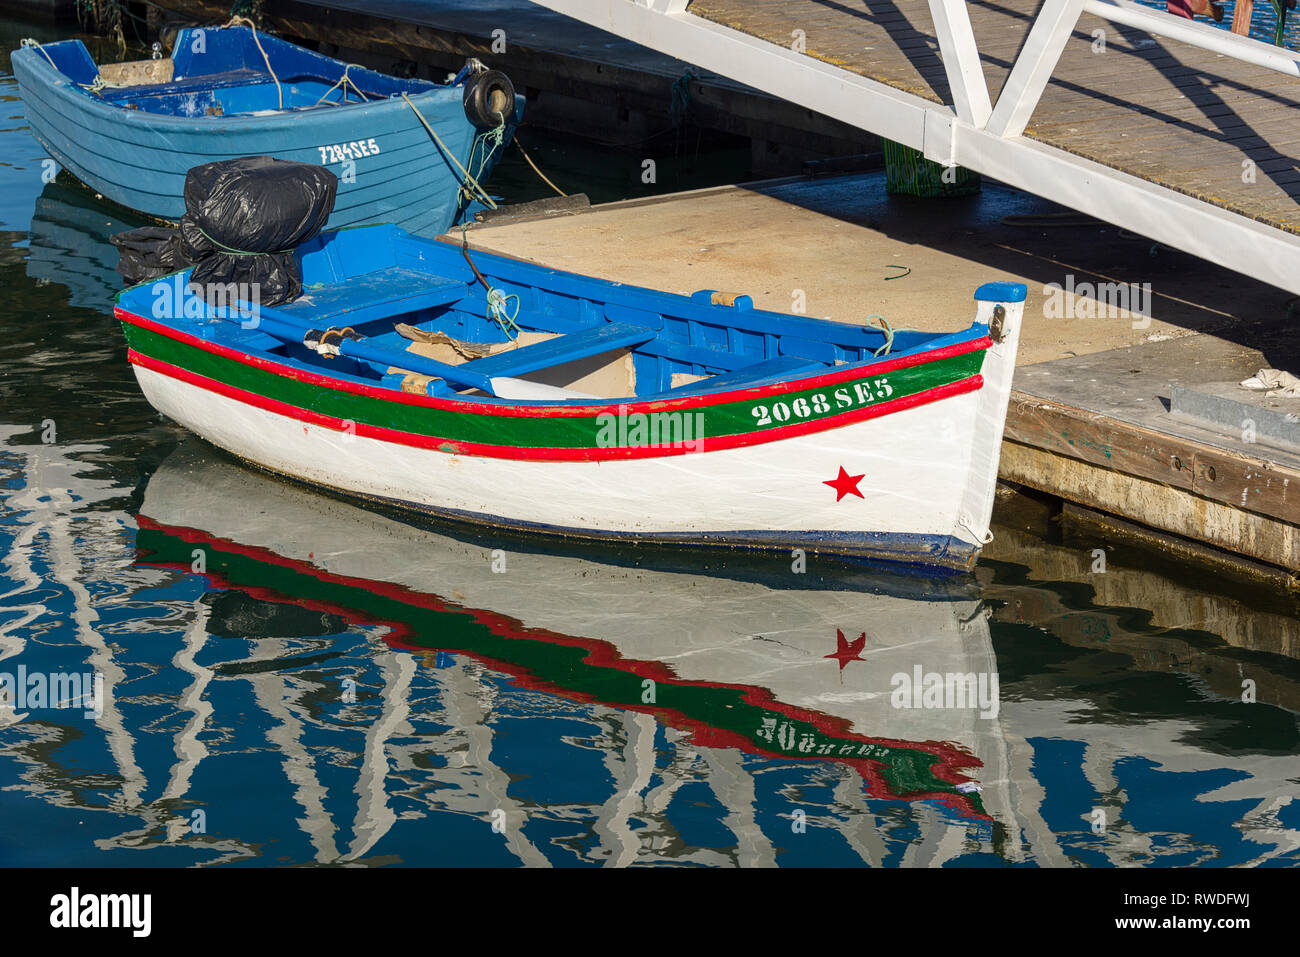 small colorful fishing boat in the port of Setubal, Portugal Stock Photo -  Alamy